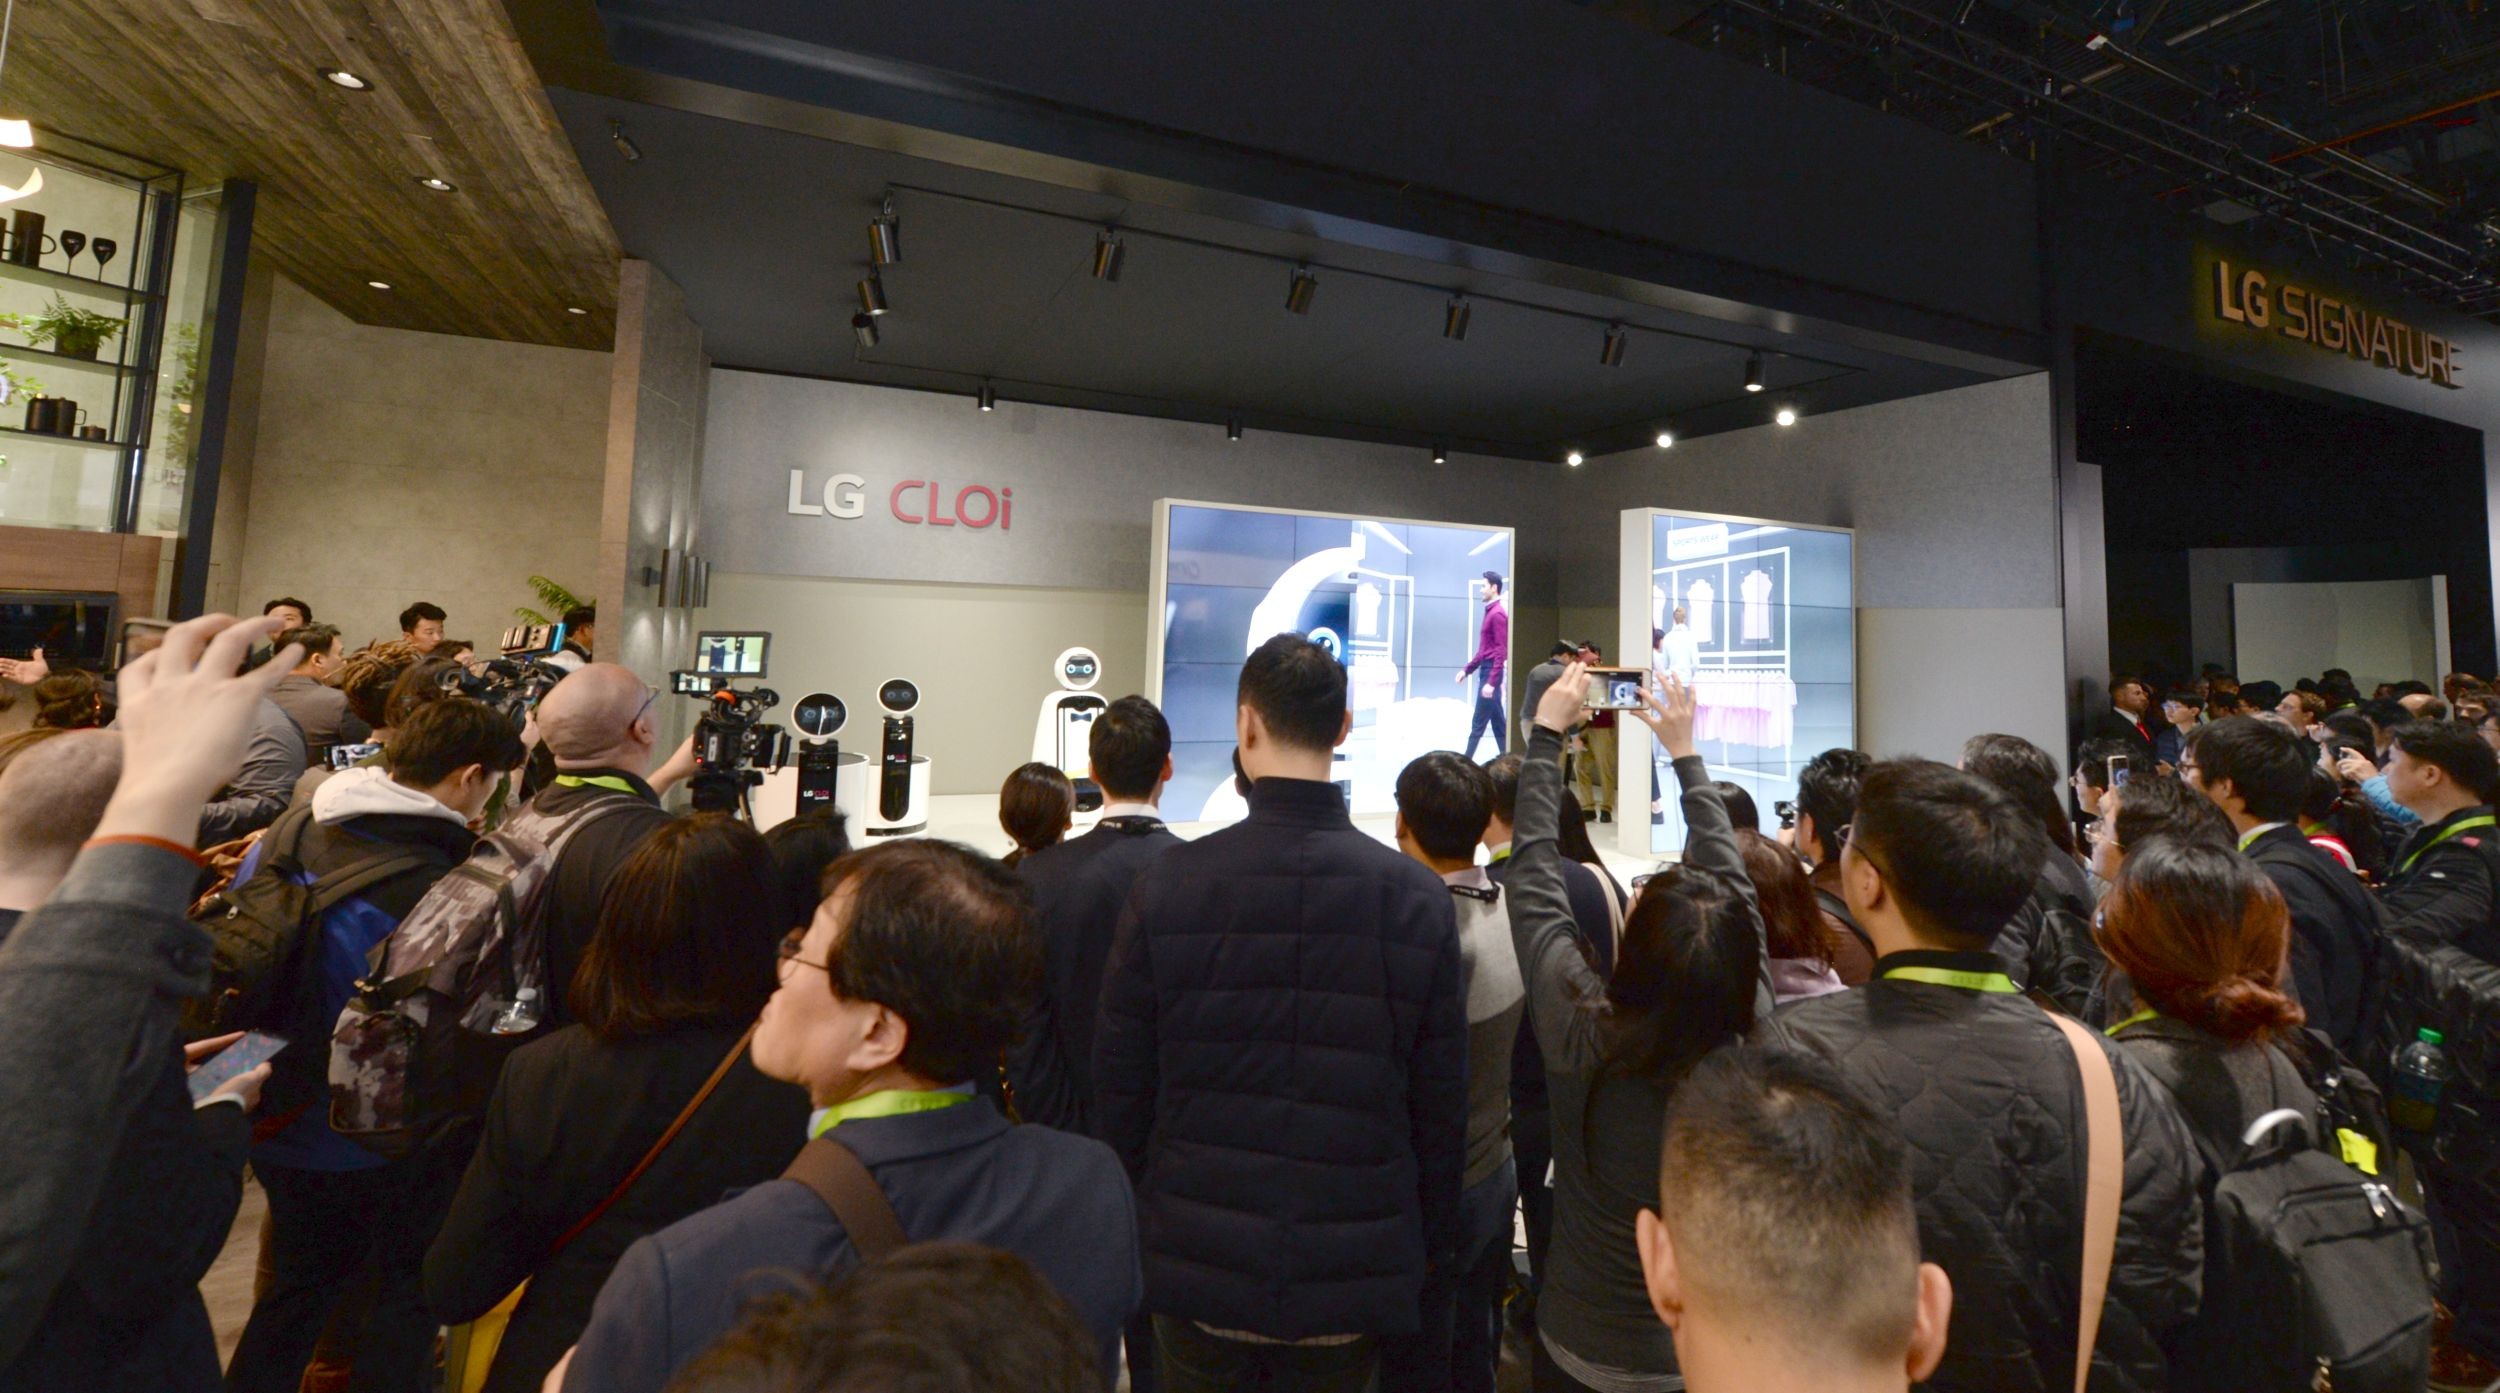 Far shot of a demonstration session for LG's CLOi commercial robots with attendees watching a presentation at the company's CES 2019 booth